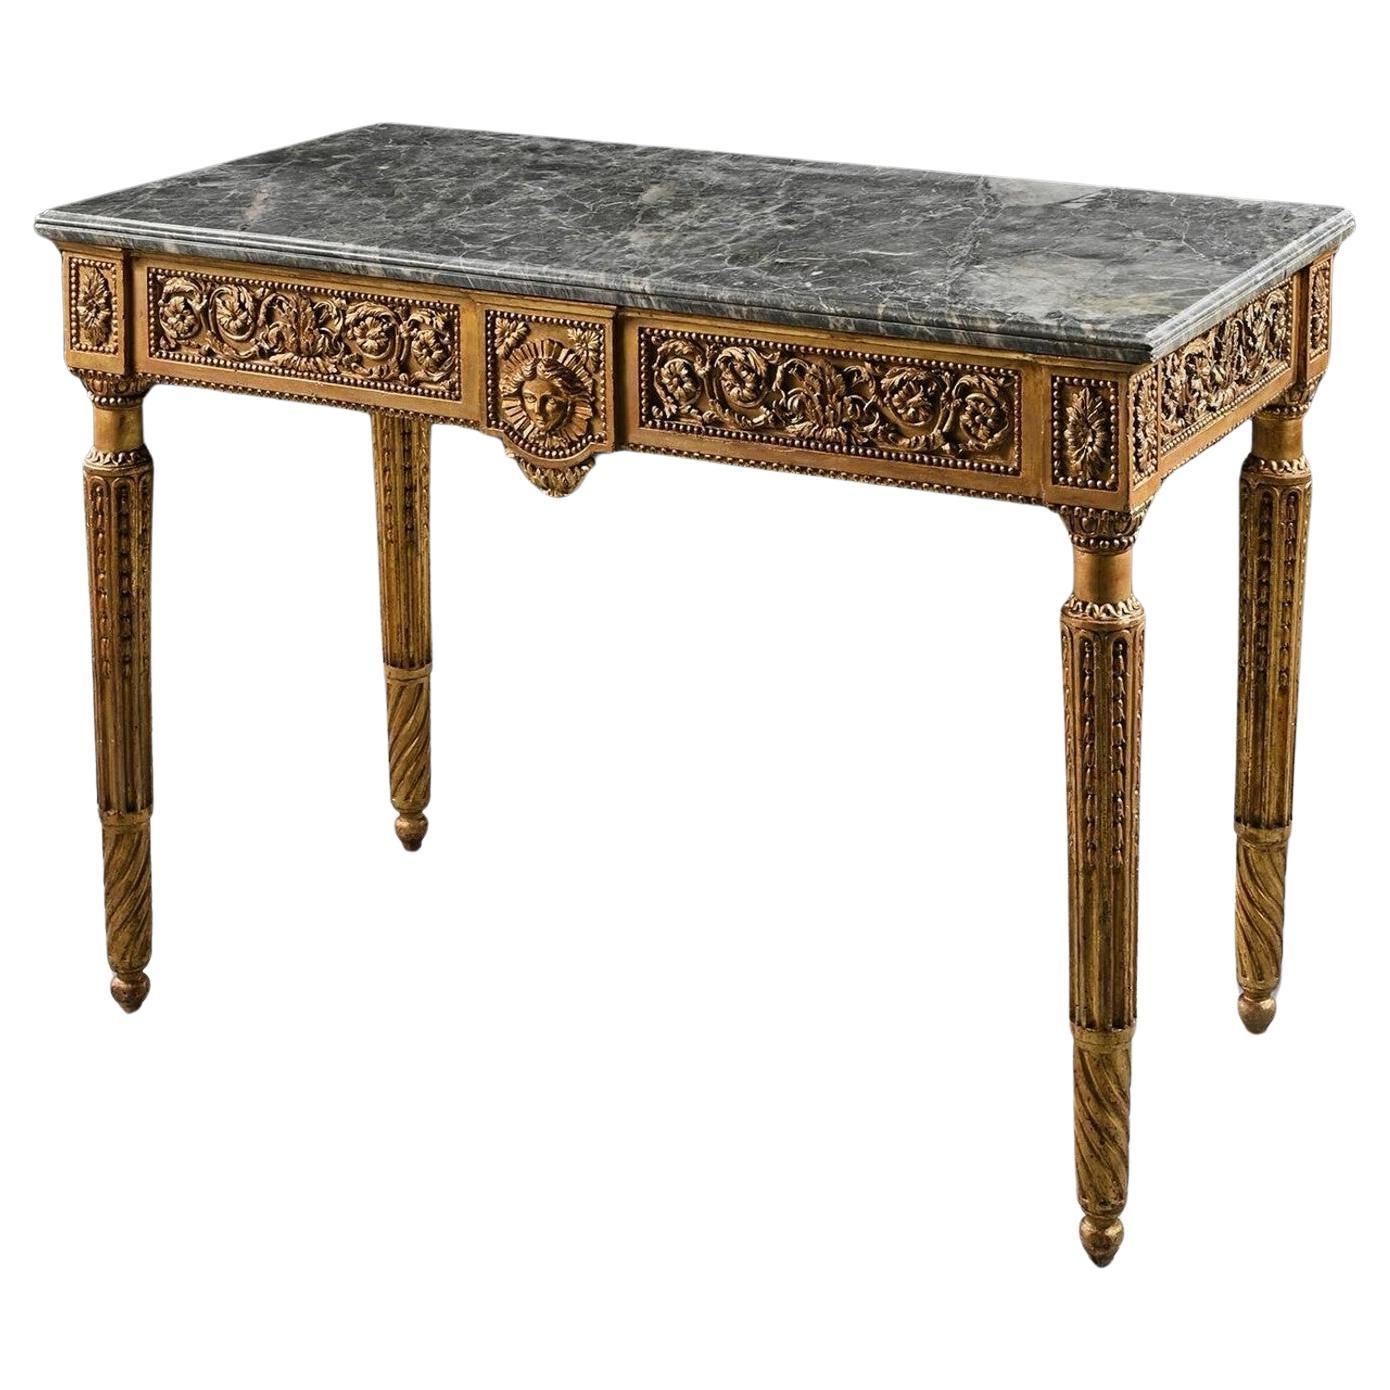 Late 18th Century Italian Carved Giltwood Marble Top Console Table For Sale